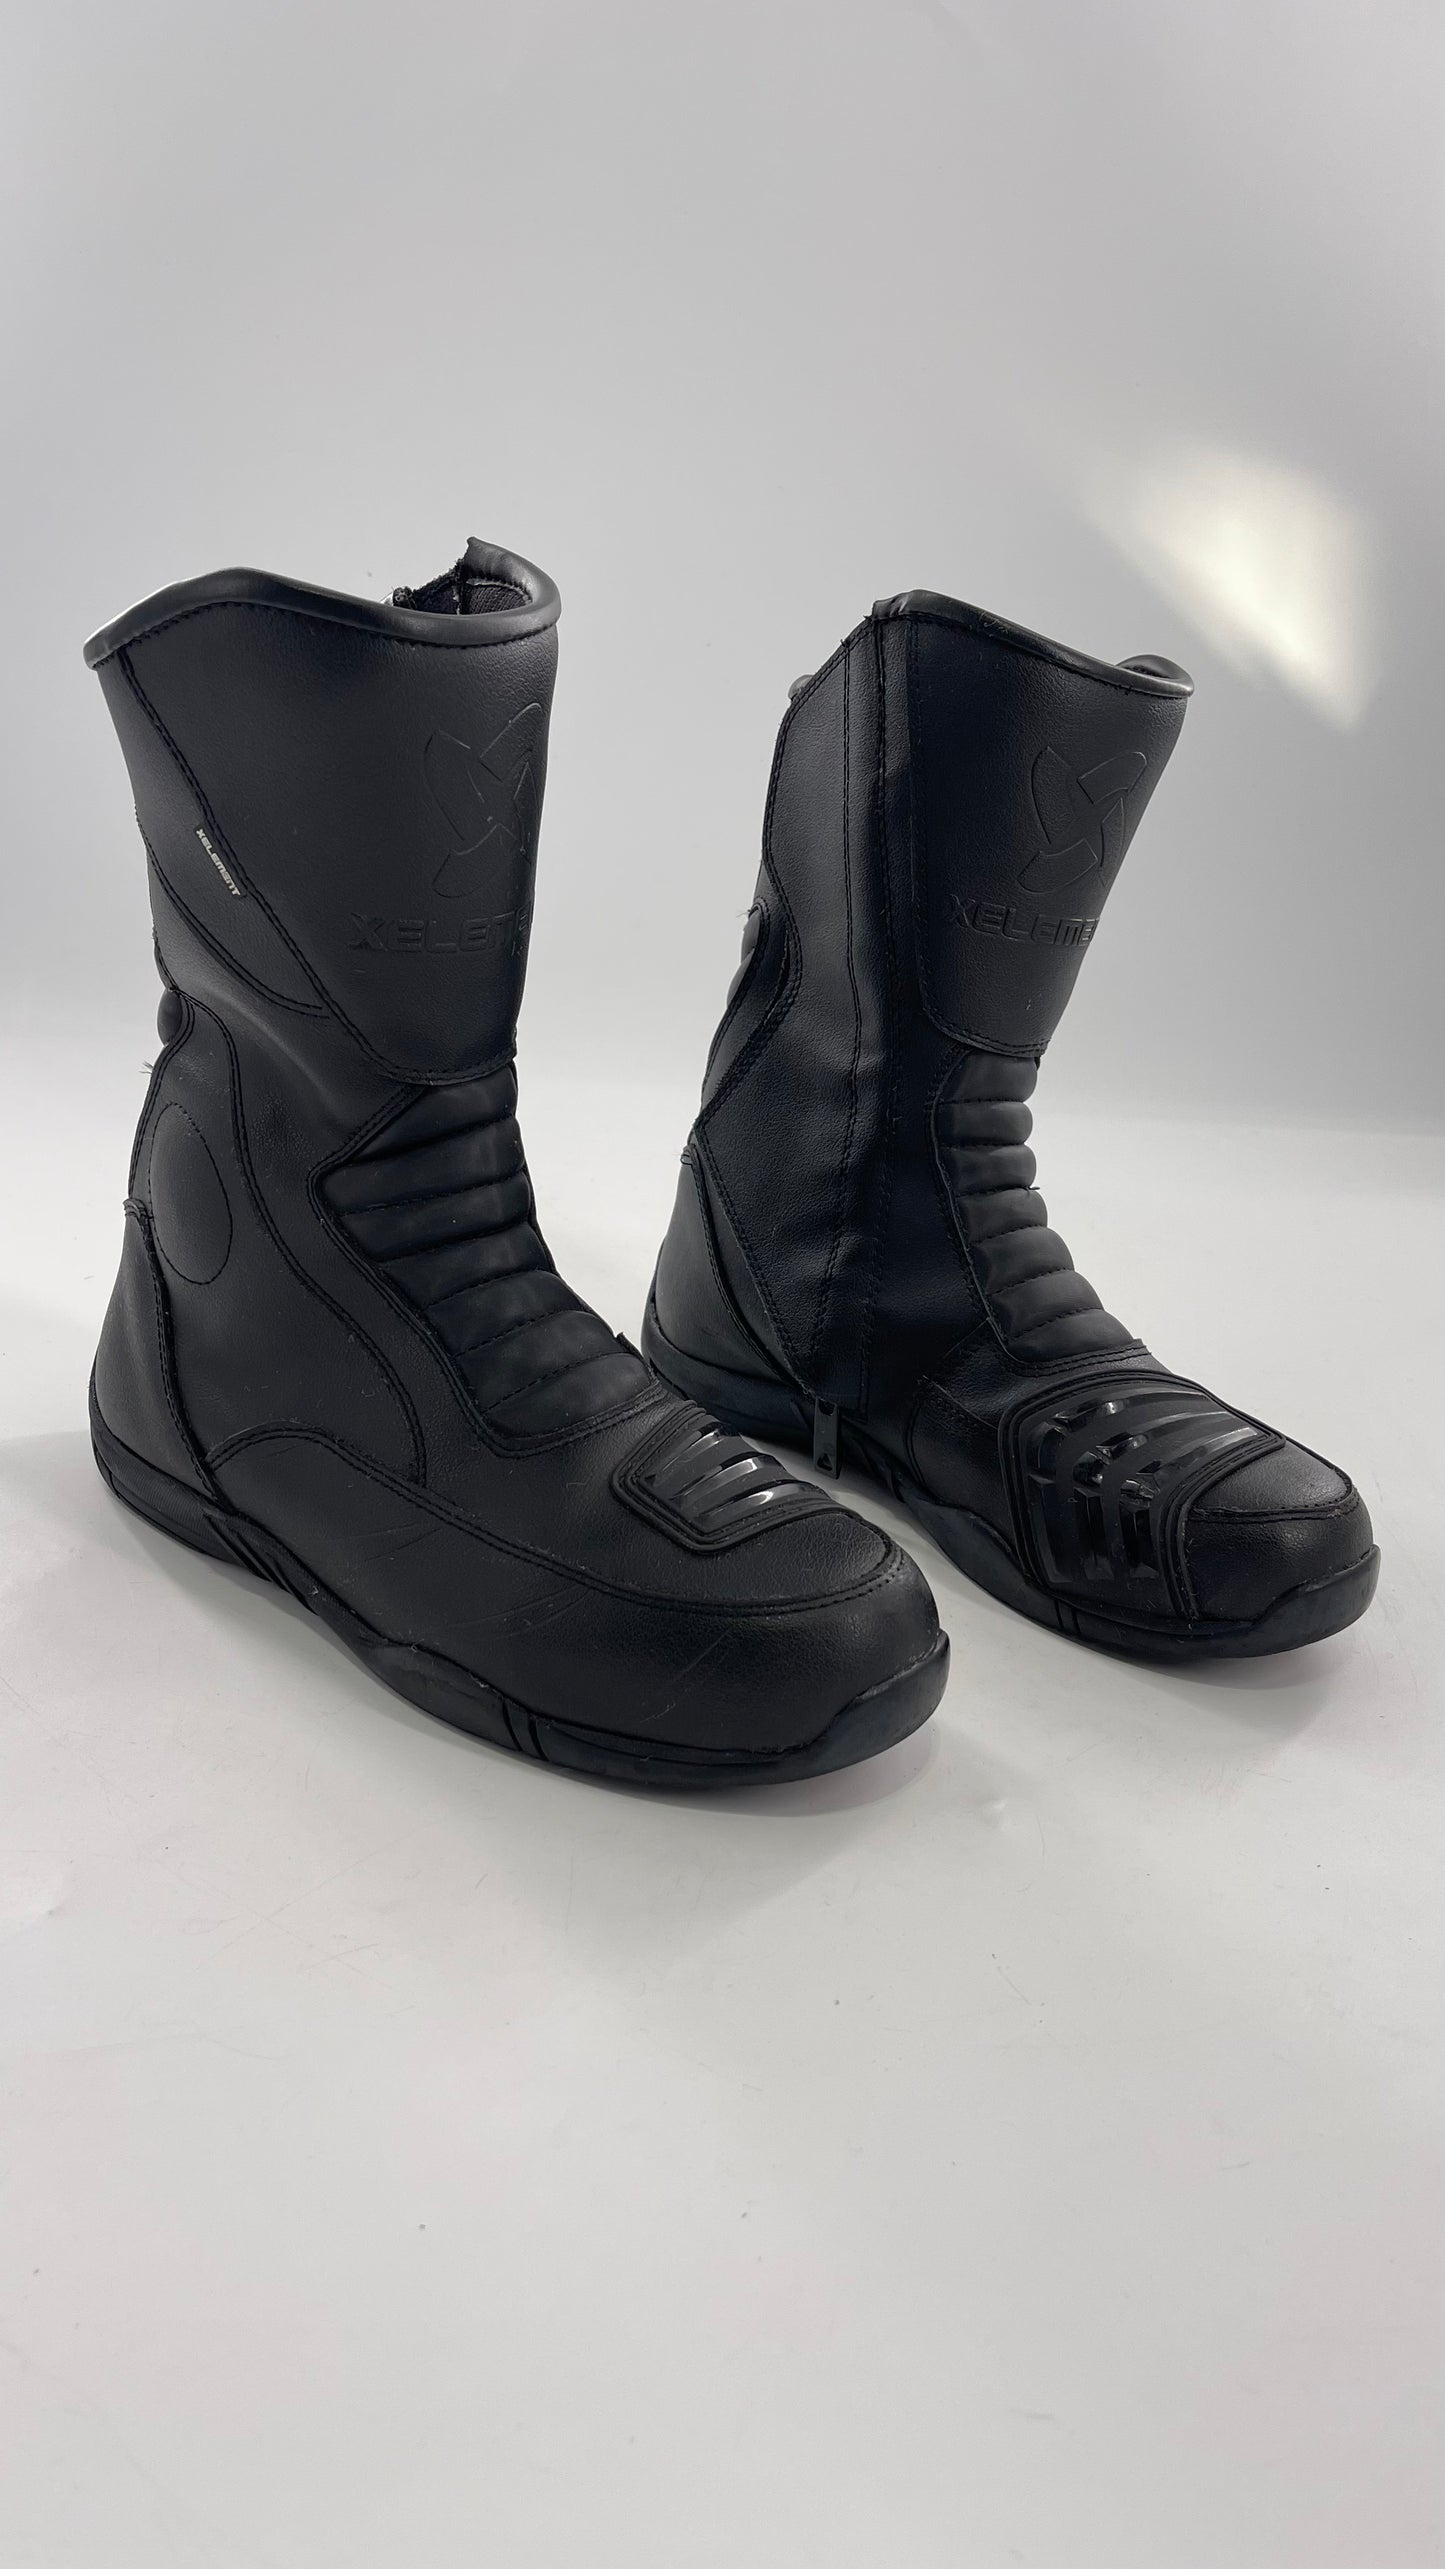 XELEMENT Black Leather Motorcycle Motocross Riding Boots (9.5)